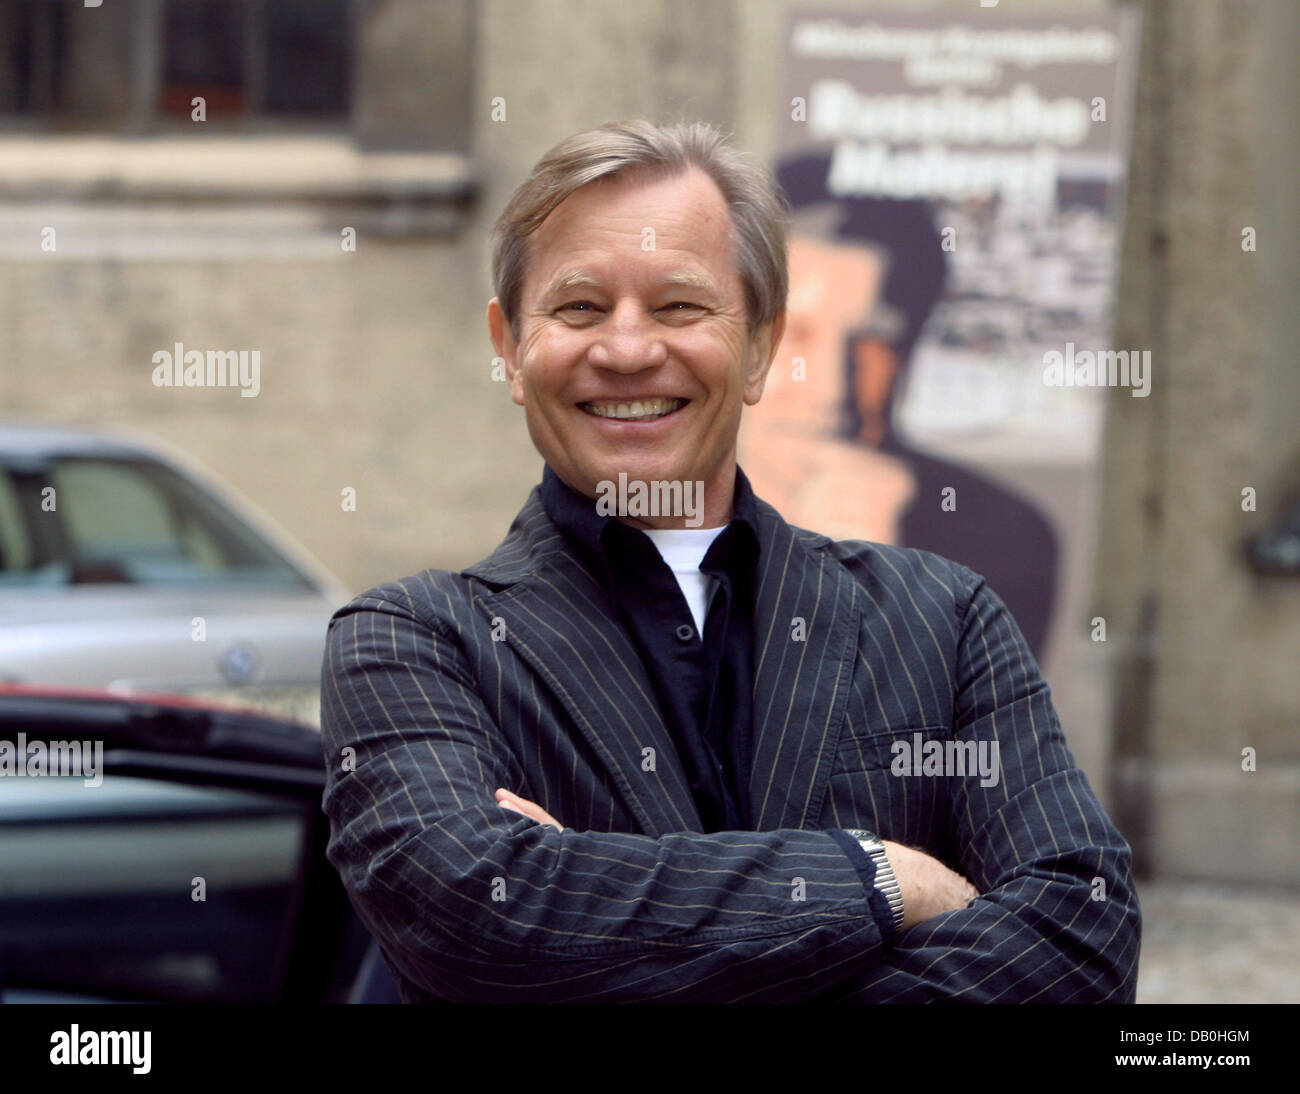 British actor Michael York shown on the set in Munich, Germany, 30 August 2007. The Russian film 'Mika und Alfred' is shot on the compounds of the 'Nationalmuseum' in Munich over five days. York stars as a painter, who can kill by looks. Photo: Frank Maechler Stock Photo